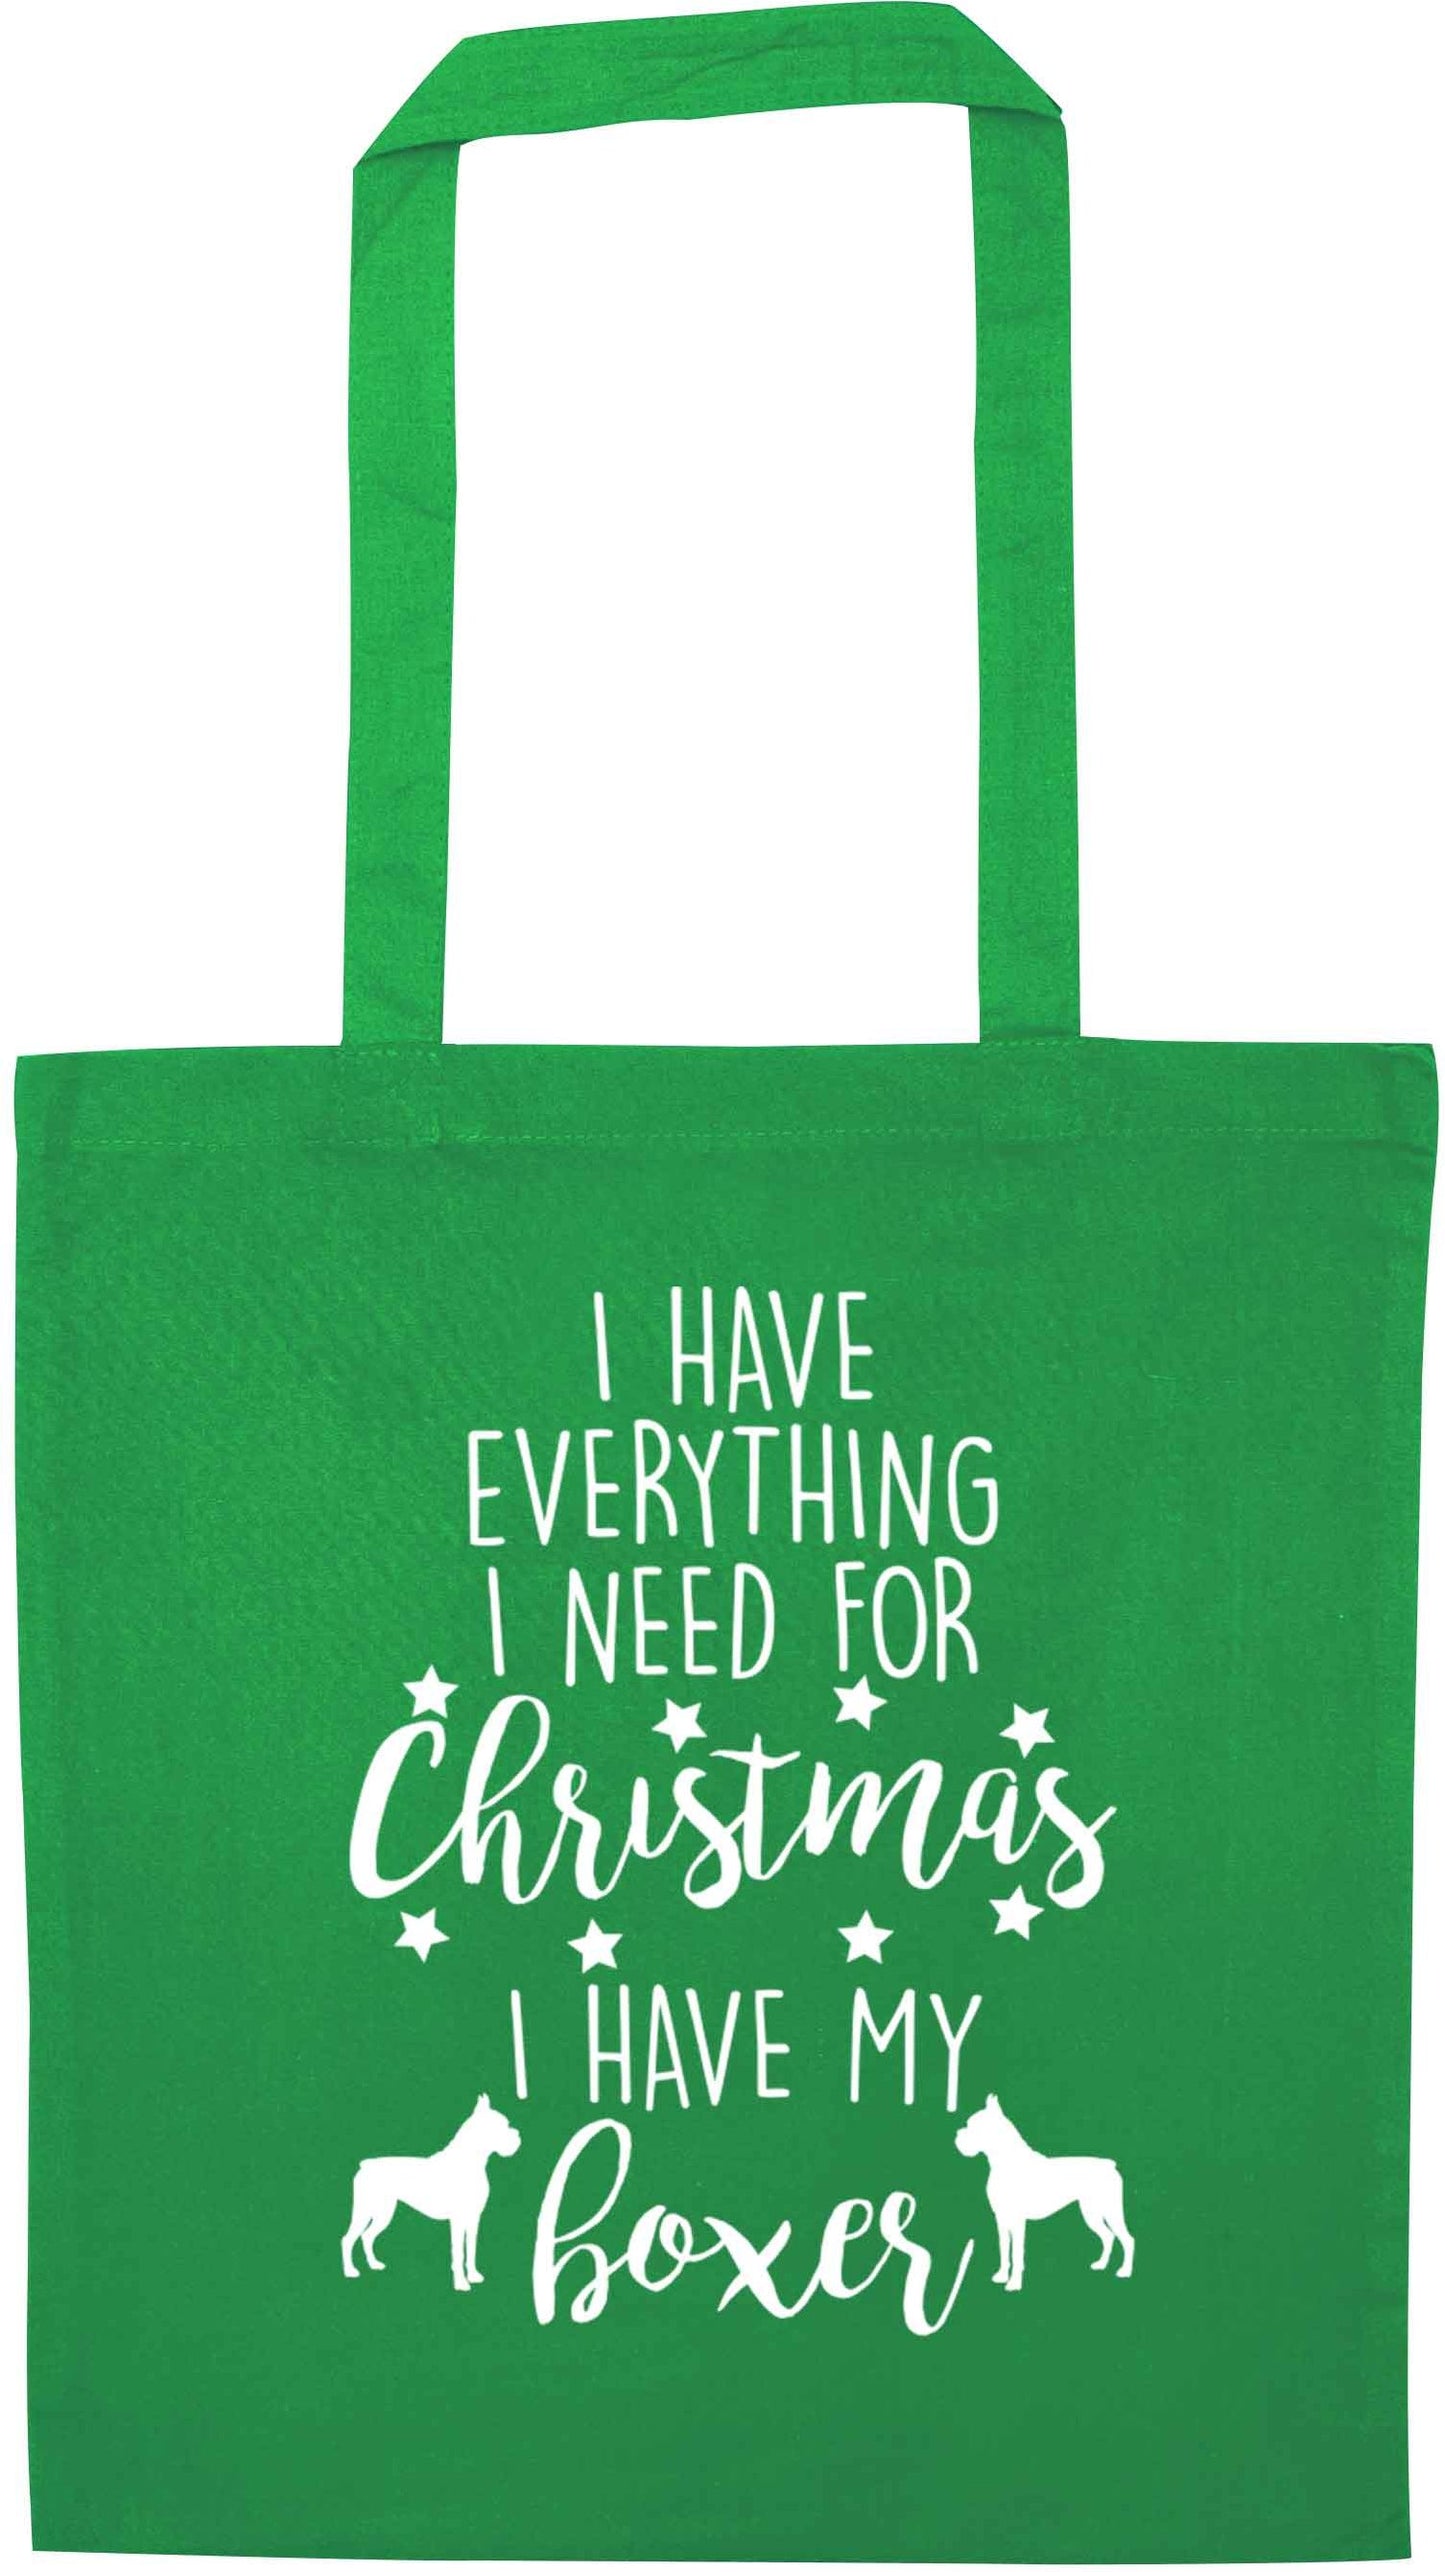 I have everything I need for Christmas I have my boxer green tote bag